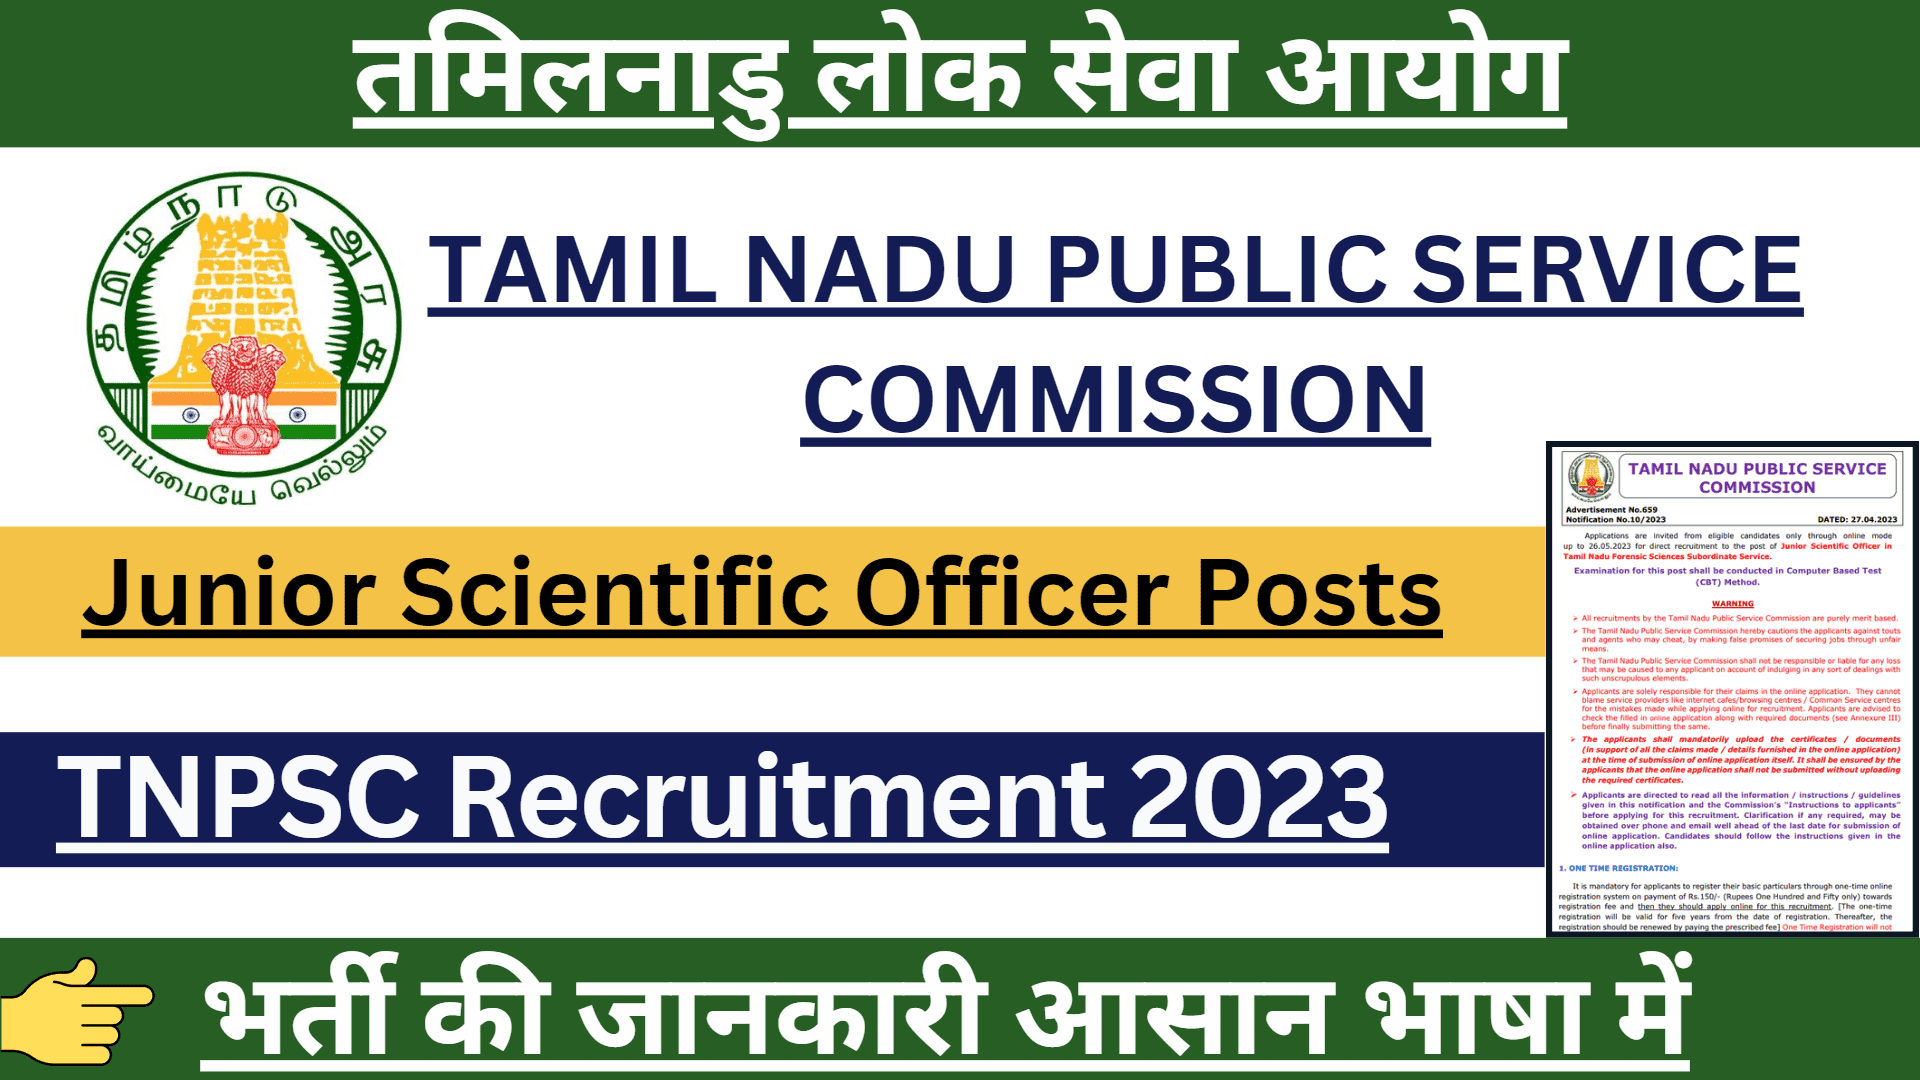 TNPSC Recruitment 2023-Apply for Junior Scientific Officer Posts, Salary Rs.135100